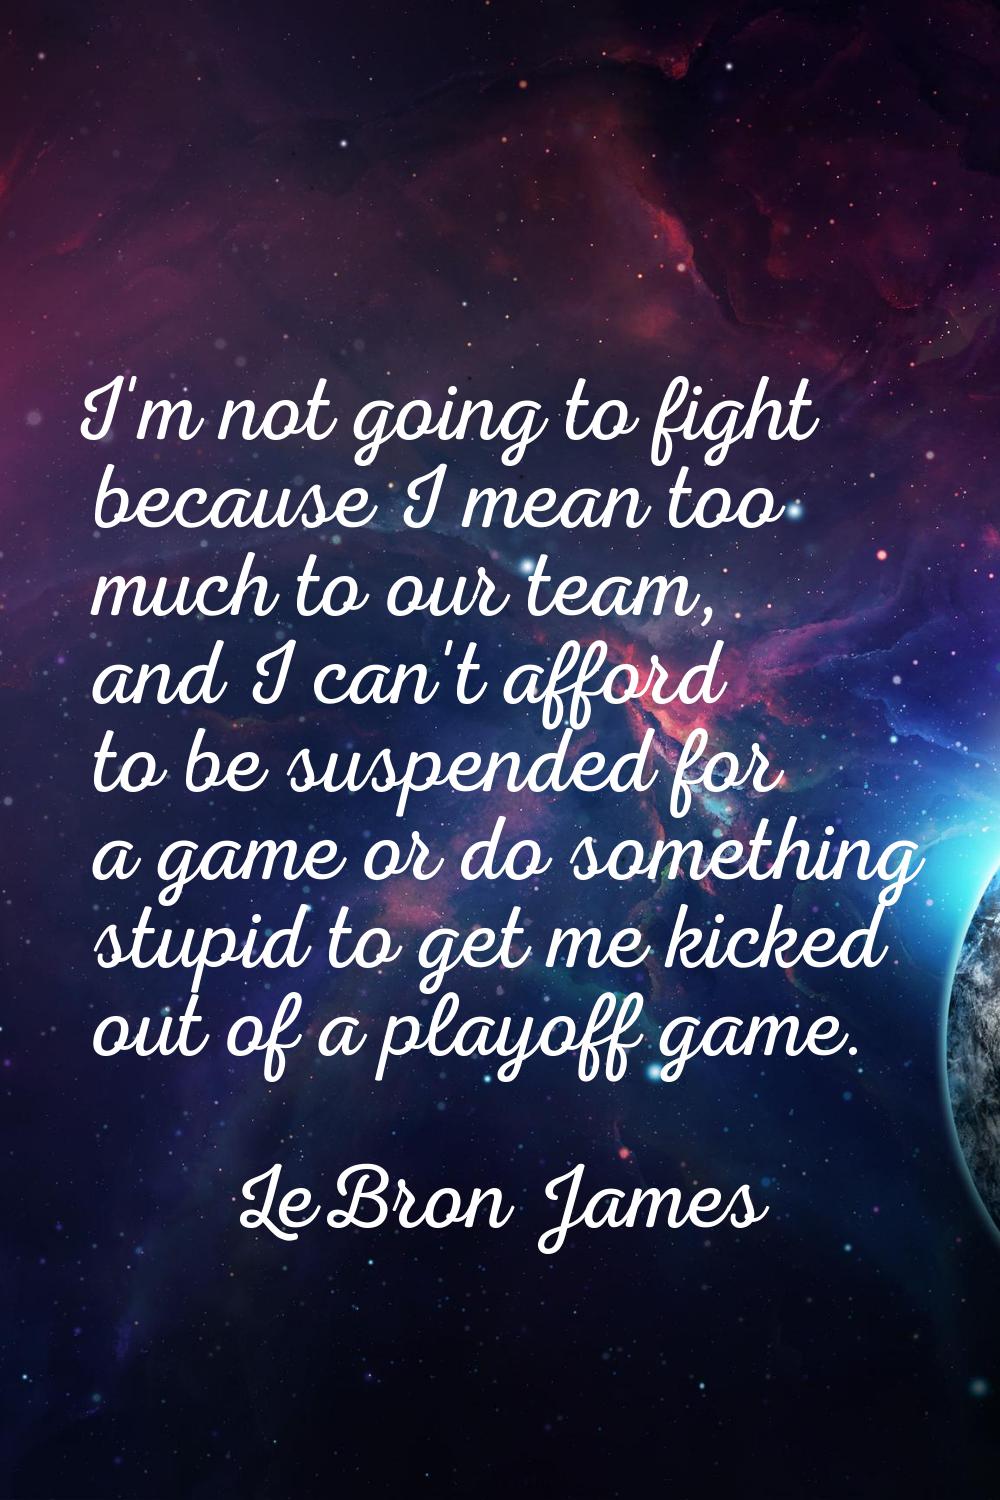 I'm not going to fight because I mean too much to our team, and I can't afford to be suspended for 